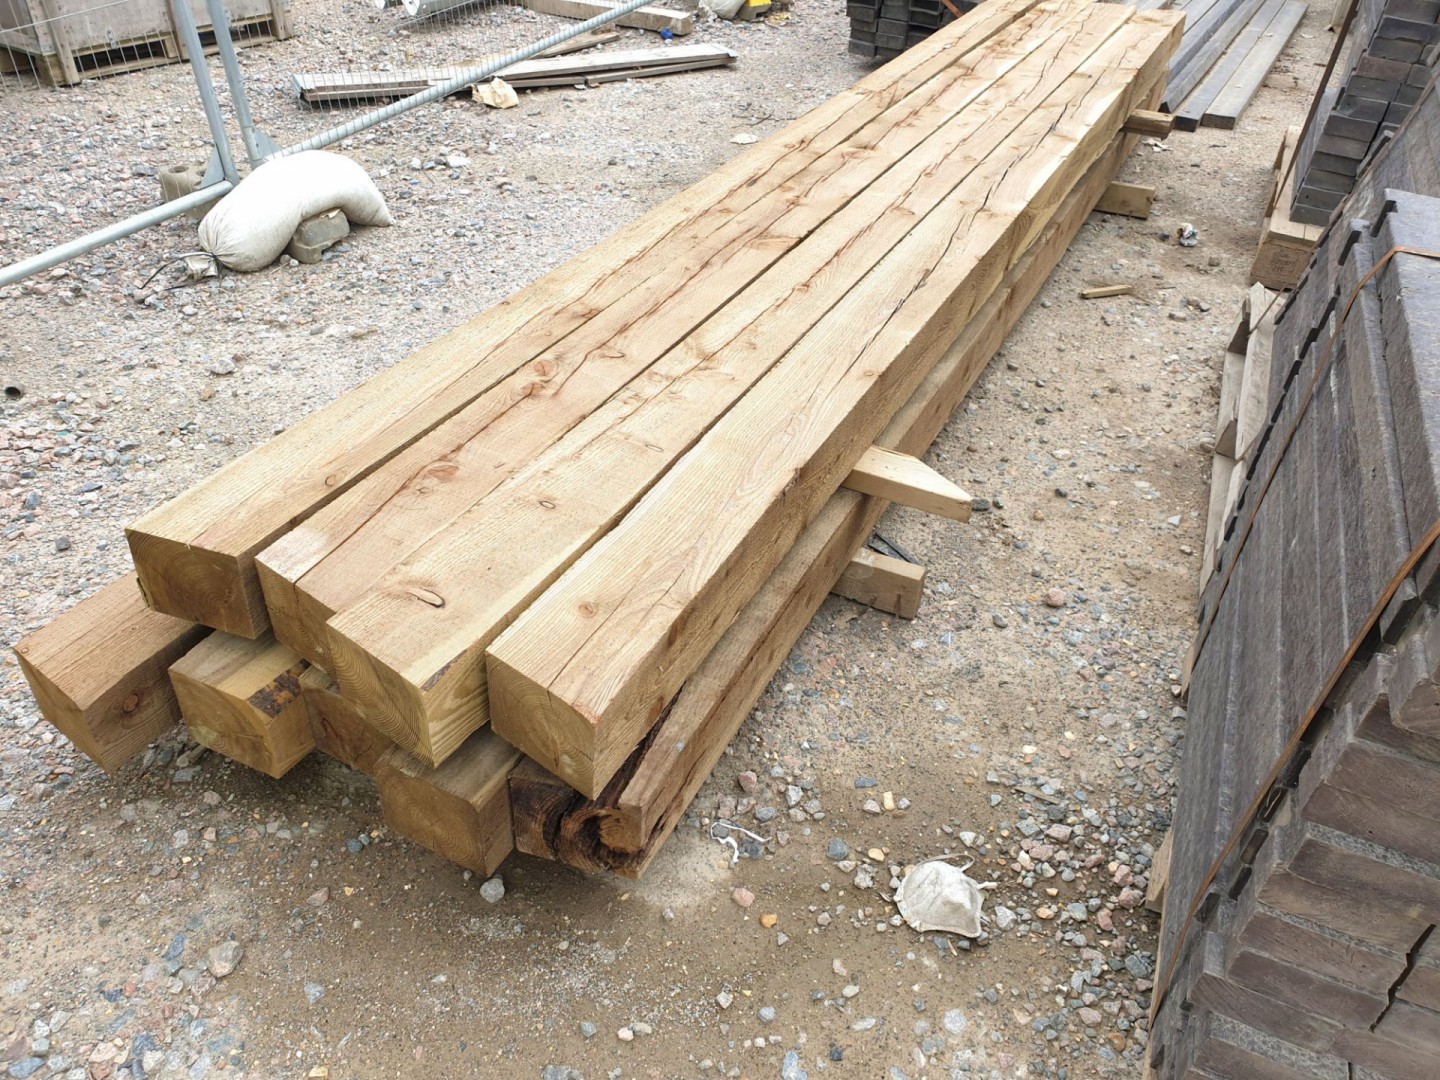 9x treated rough sawn wooden posts, 170x140x4200mm...